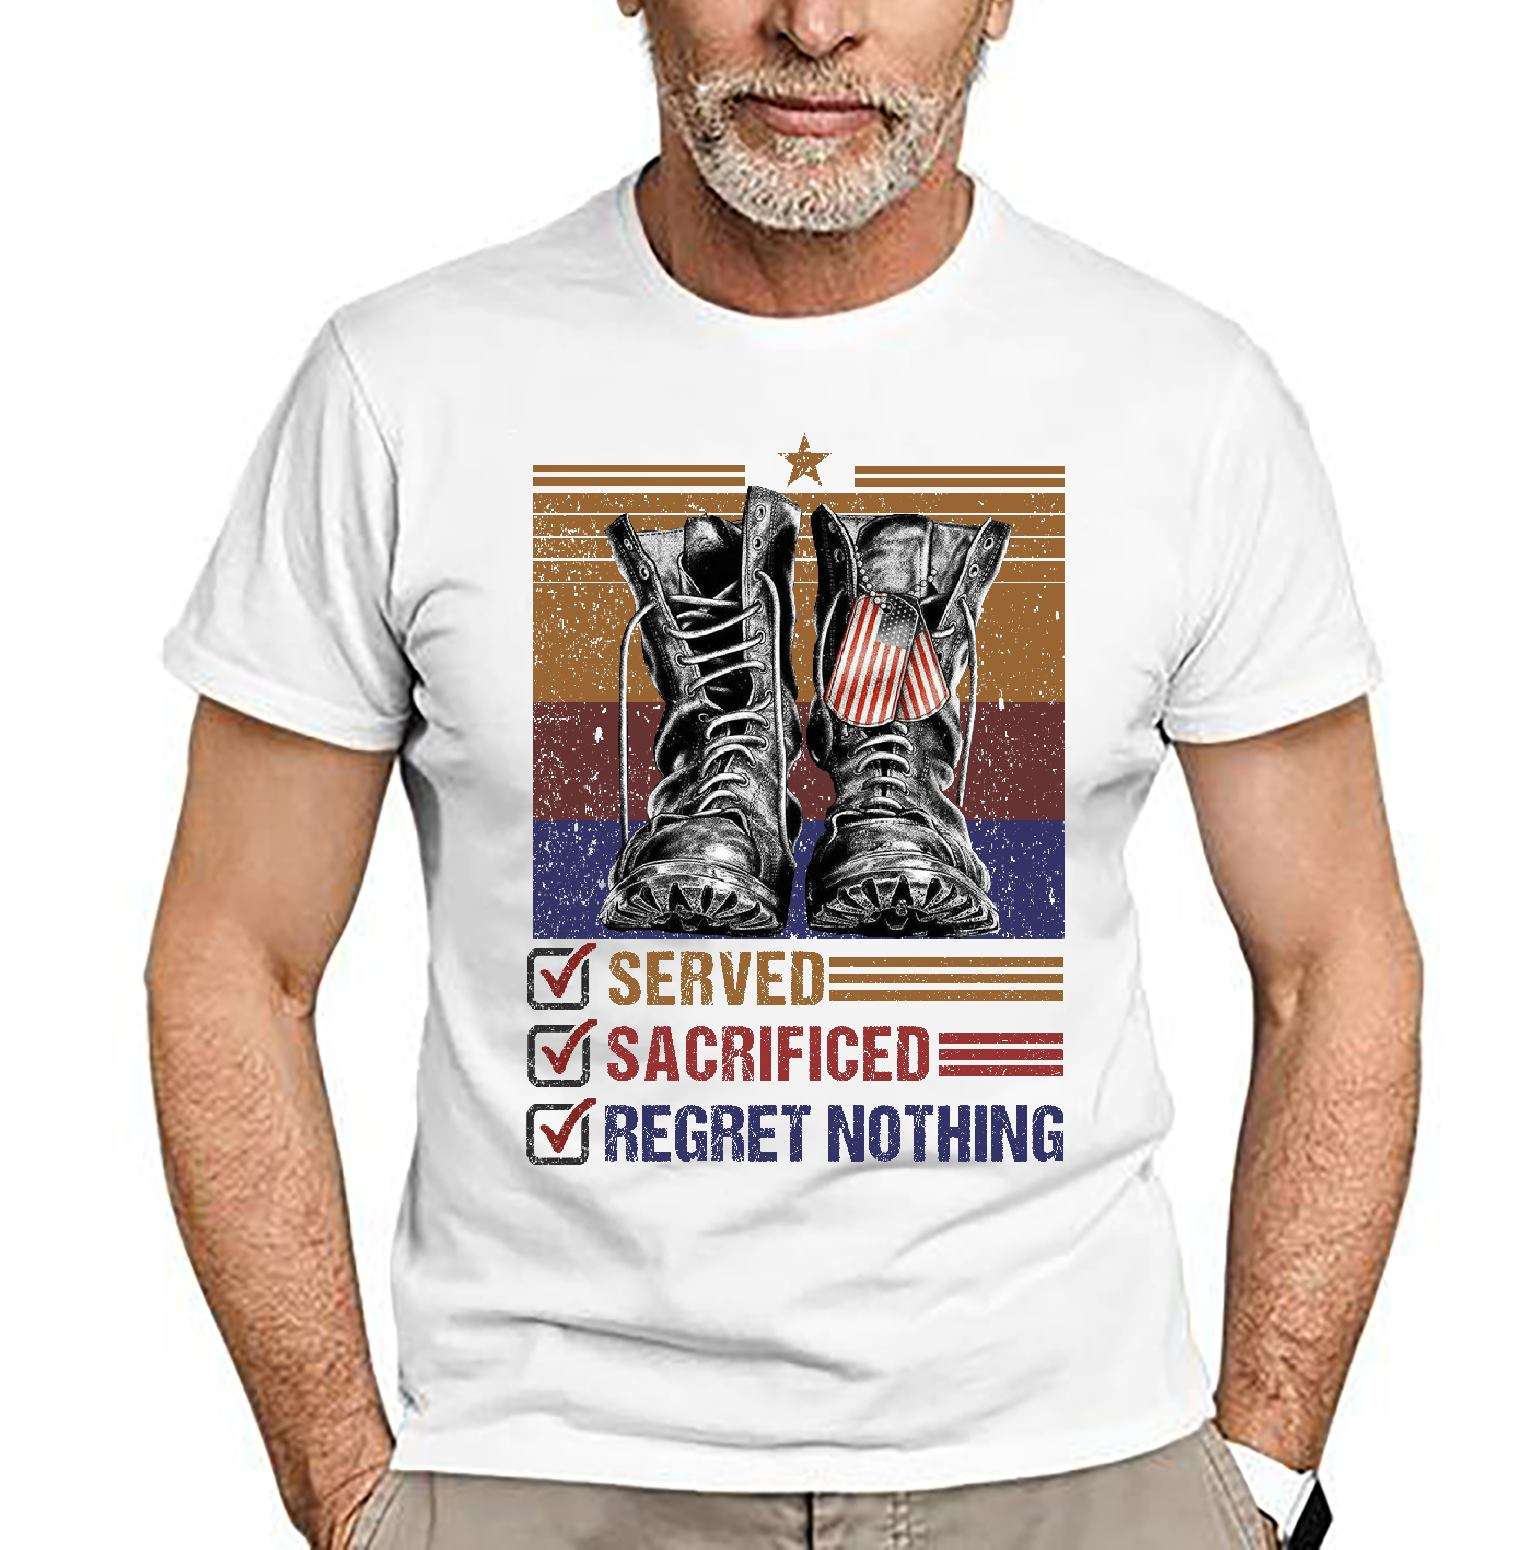 Served sacrified regret nothing - American veteran shoes, America country of Army